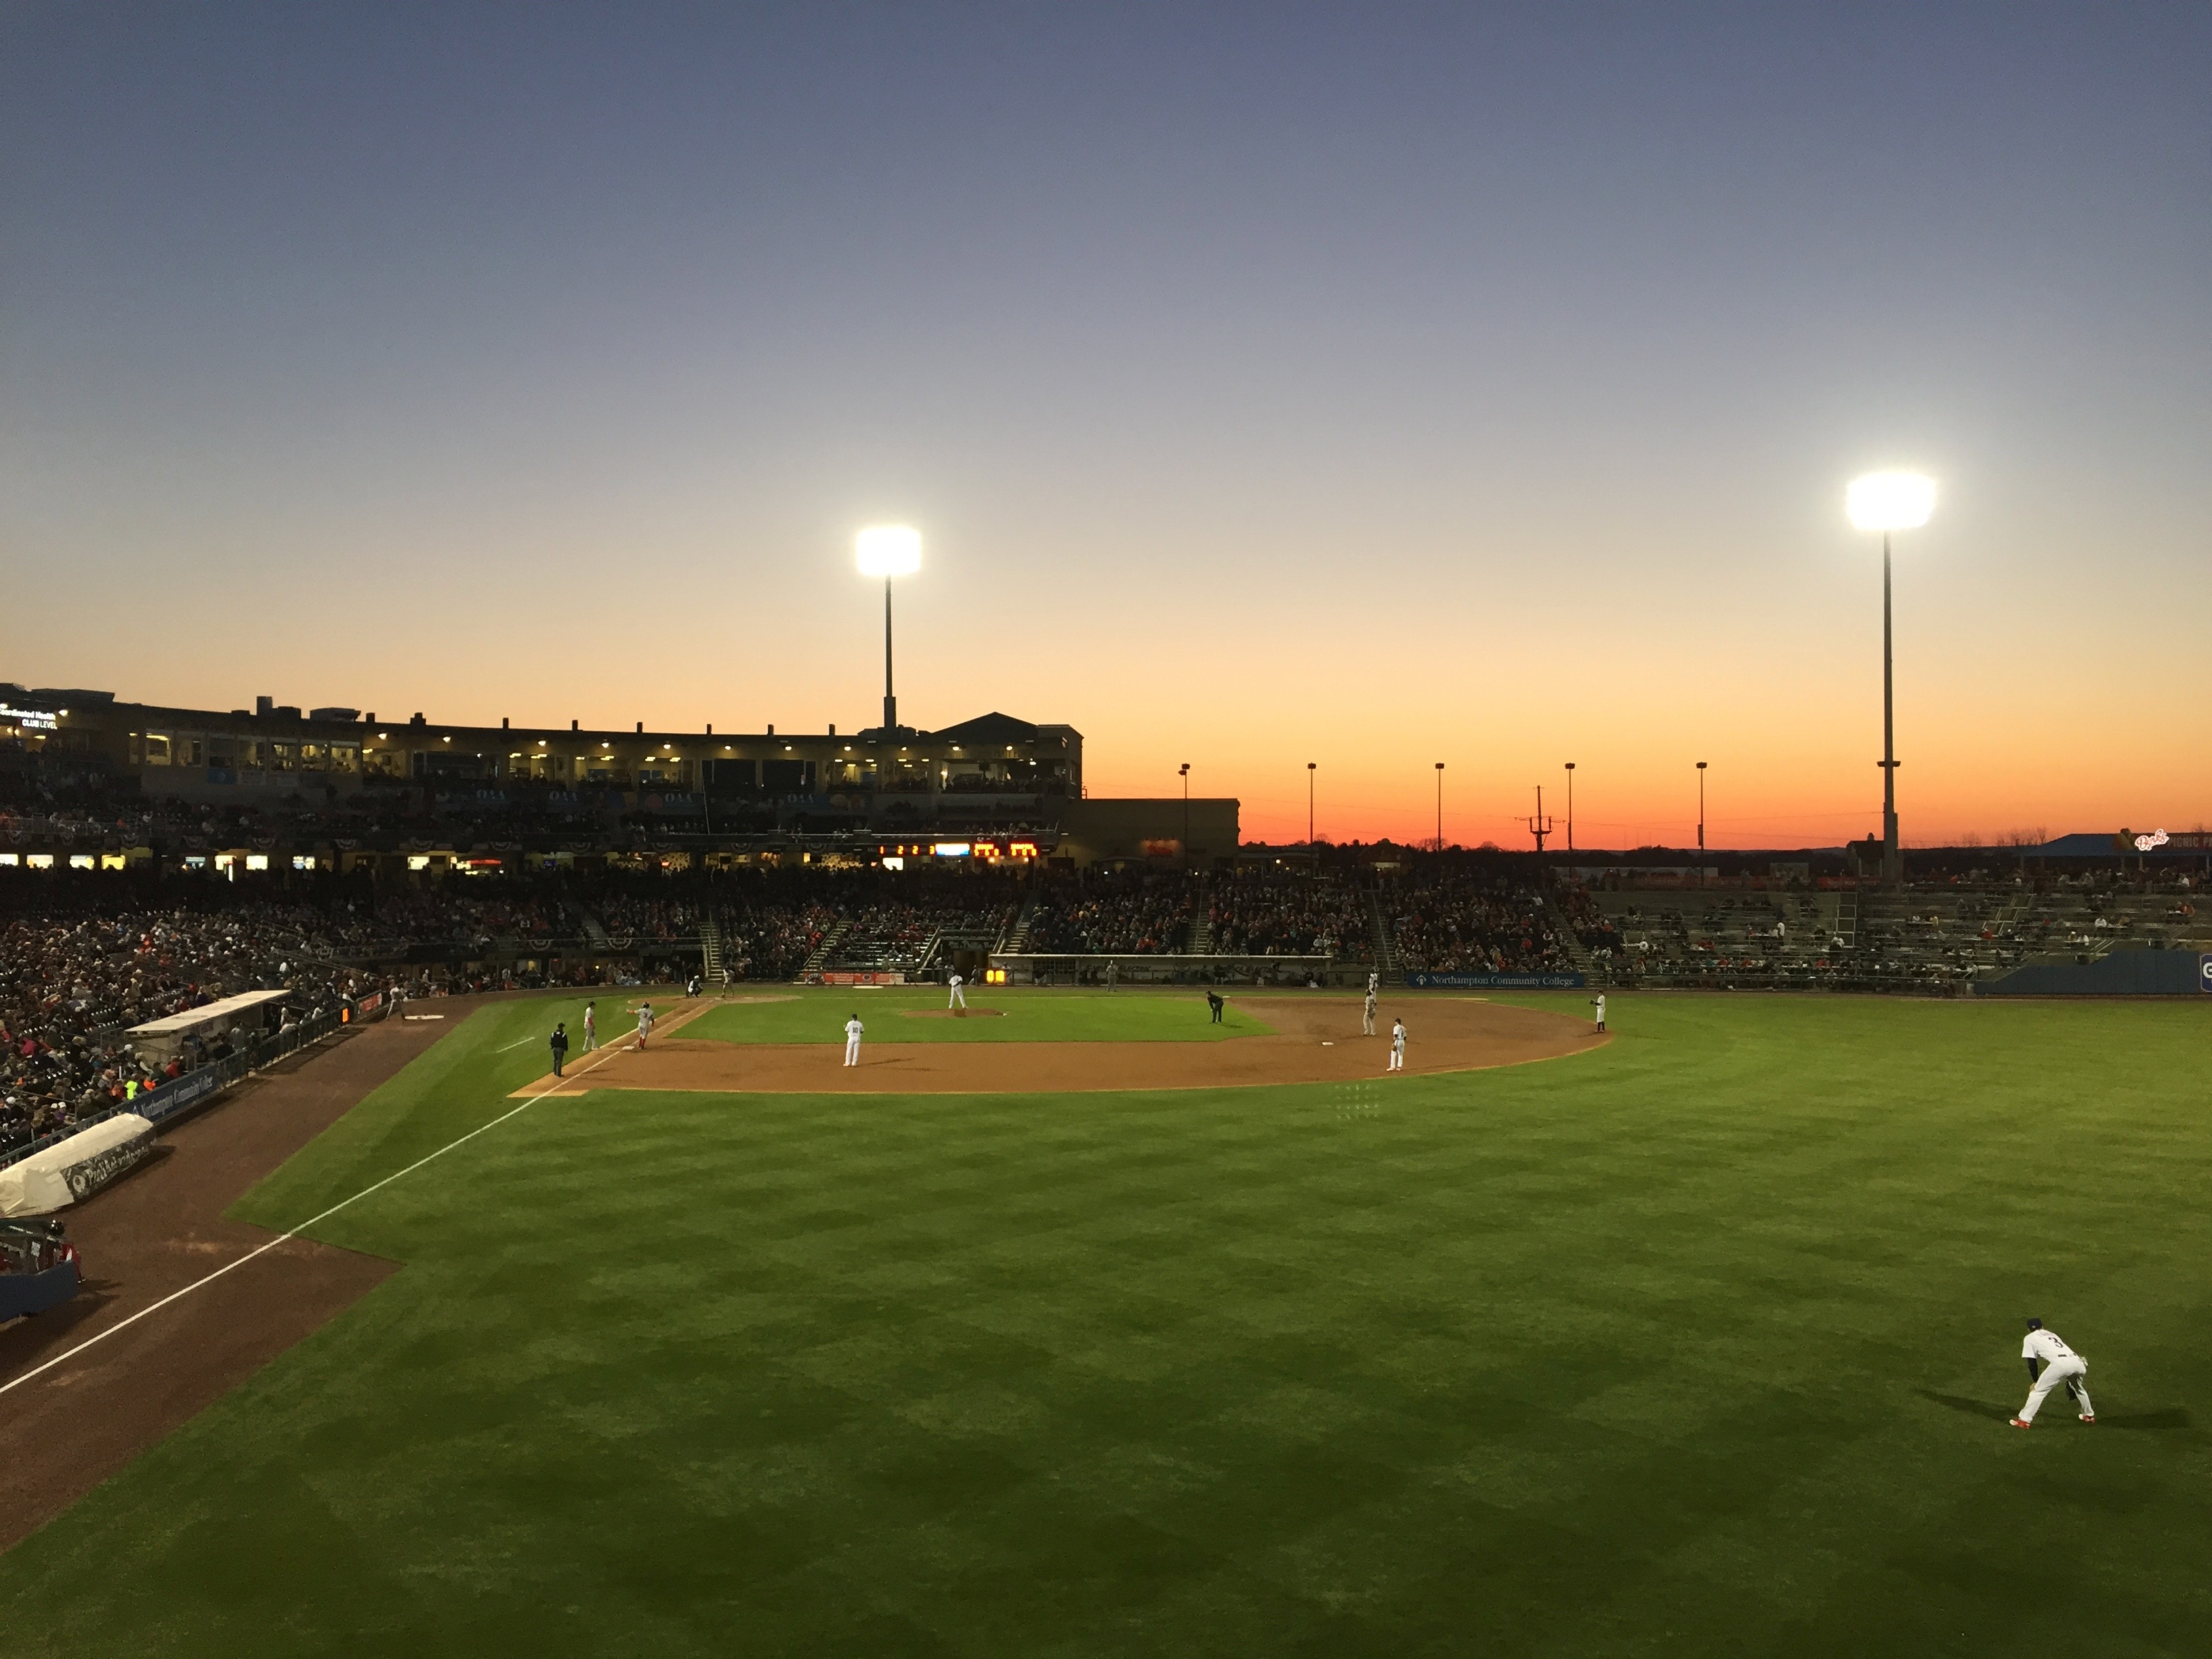 Sunset at an early spring IronPigs baseball game. The big AAA lights are lit up and the sky is just beginning to fade to black.